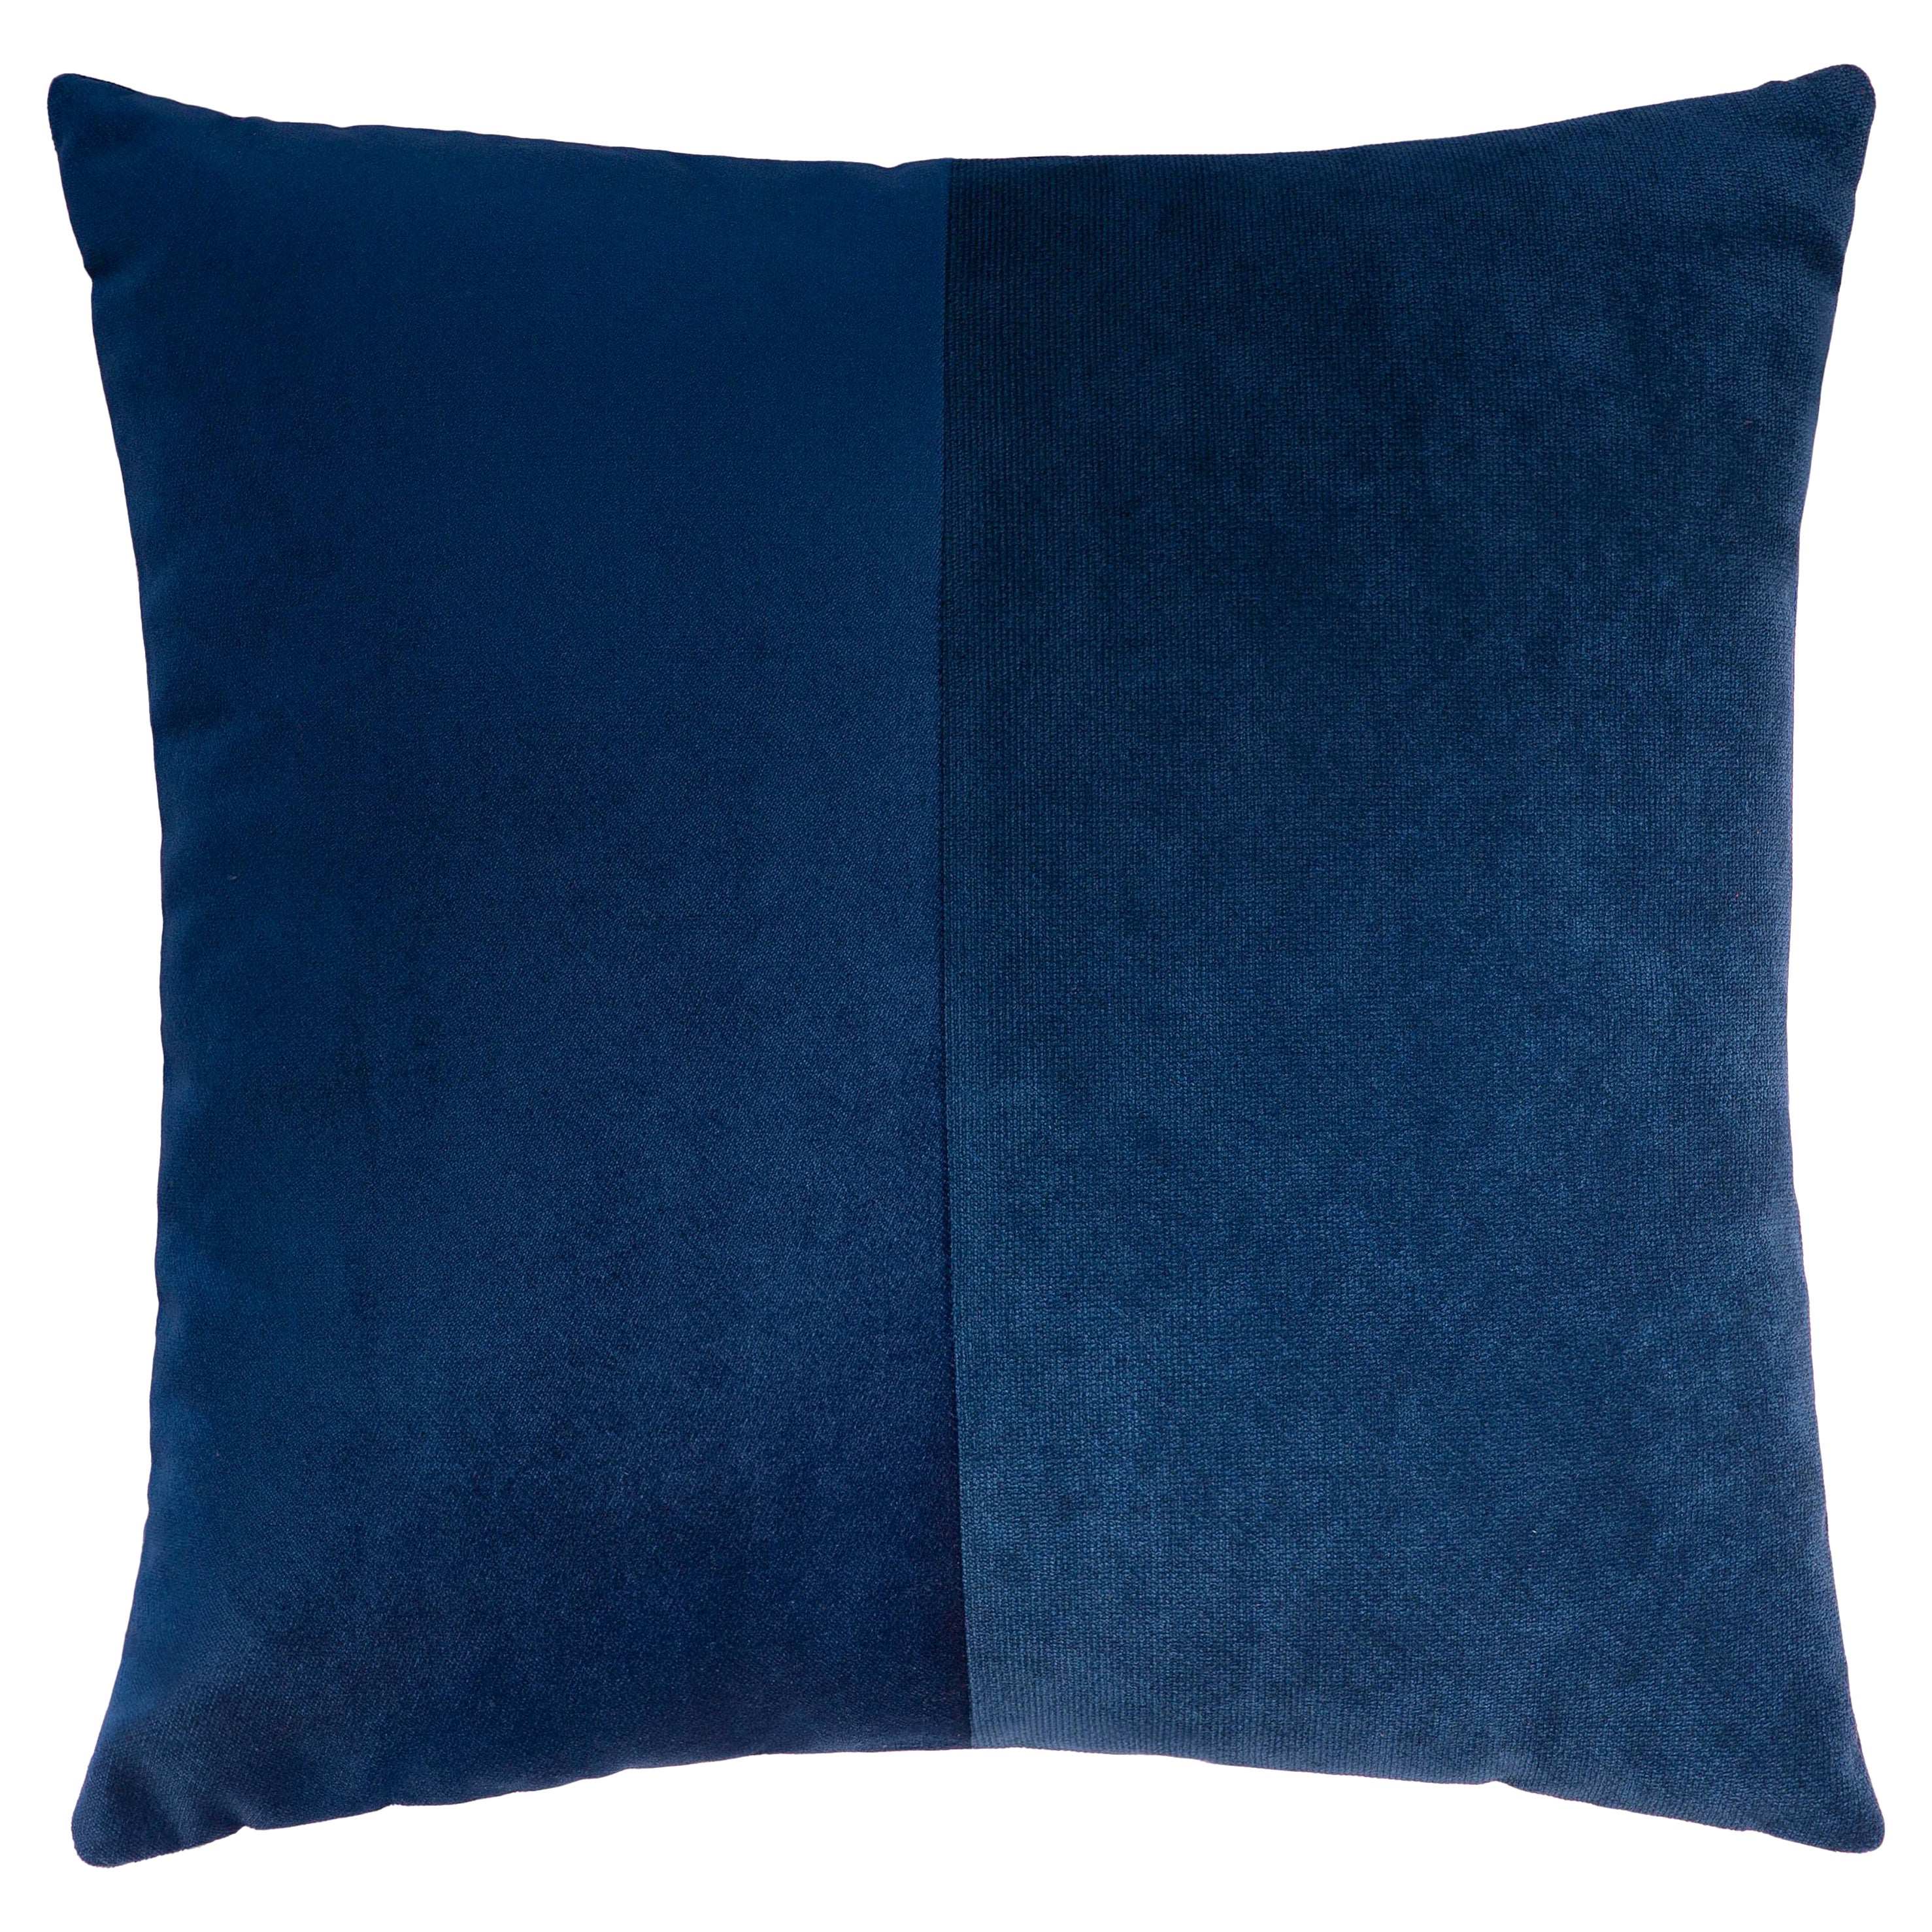 Double Blue Cushion For Sale